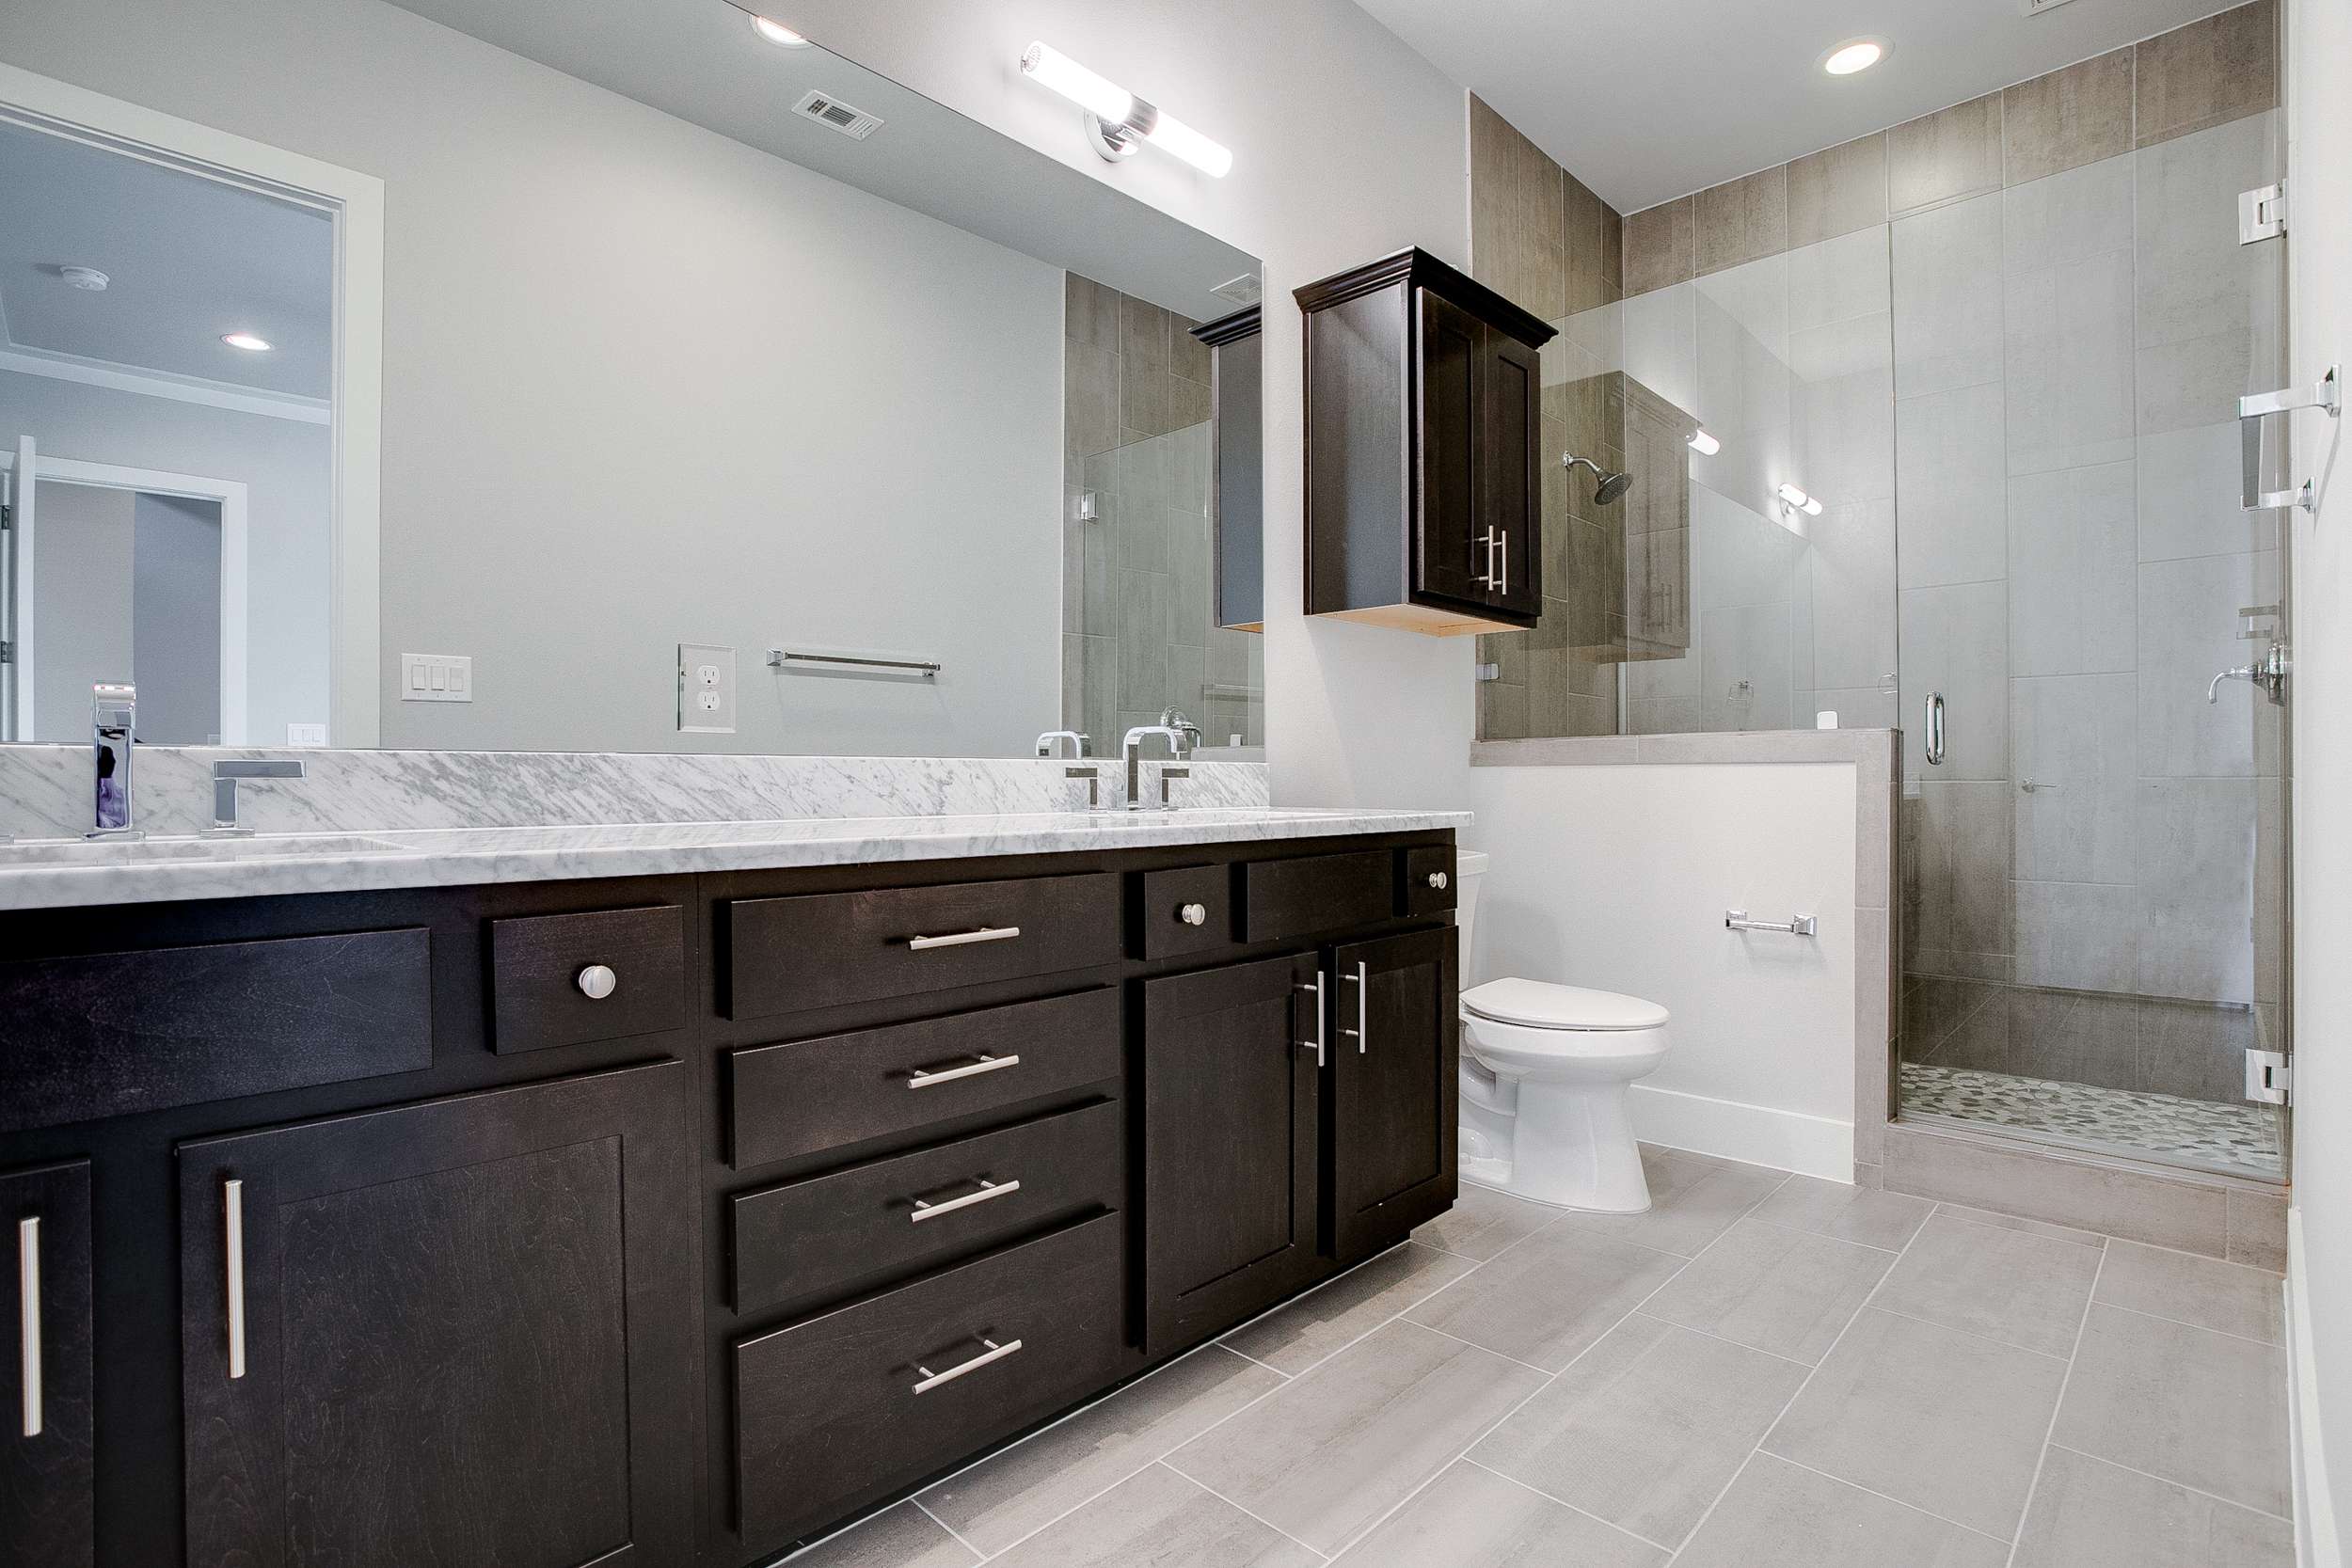 Interior view of the bathroom with dark cabinets, double sinks, a toilet, and a tiled shower with a glass door